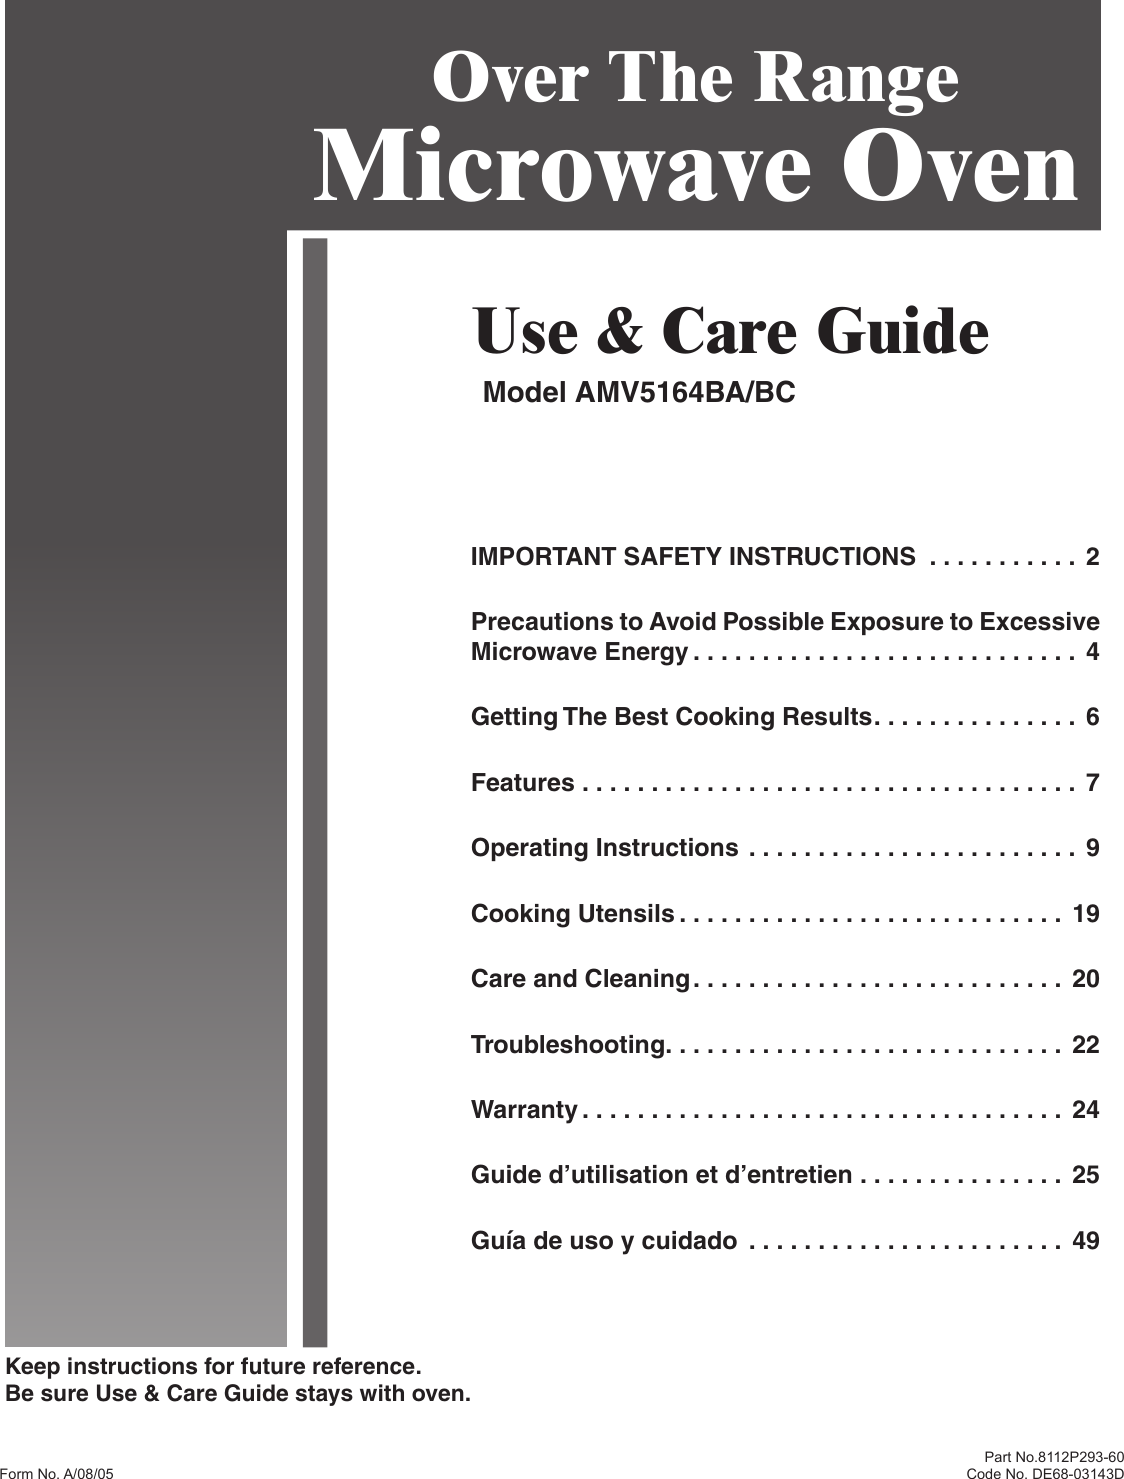 Keep instructions for future reference.Be sure Use &amp; Care Guide stays with oven.Part No.8112P293-60Code No. DE68-03143DUse &amp; Care GuideModel AMV5164BA/BCOver The Range Microwave OvenIMPORTANT SAFETY INSTRUCTIONS  . . . . . . . . . . .  2Precautions to Avoid Possible Exposure to Excessive Microwave Energy . . . . . . . . . . . . . . . . . . . . . . . . . . . .  4Getting The Best Cooking Results . . . . . . . . . . . . . . .  6Features . . . . . . . . . . . . . . . . . . . . . . . . . . . . . . . . . . . .  7Operating Instructions . . . . . . . . . . . . . . . . . . . . . . . . 9Cooking Utensils . . . . . . . . . . . . . . . . . . . . . . . . . . . .  19Care and Cleaning . . . . . . . . . . . . . . . . . . . . . . . . . . .  20Troubleshooting . . . . . . . . . . . . . . . . . . . . . . . . . . . . .  22Warranty . . . . . . . . . . . . . . . . . . . . . . . . . . . . . . . . . . .  24Guide d’utilisation et d’entretien . . . . . . . . . . . . . . .  25Guía de uso y cuidado  . . . . . . . . . . . . . . . . . . . . . . .  49Form No. A/08/05